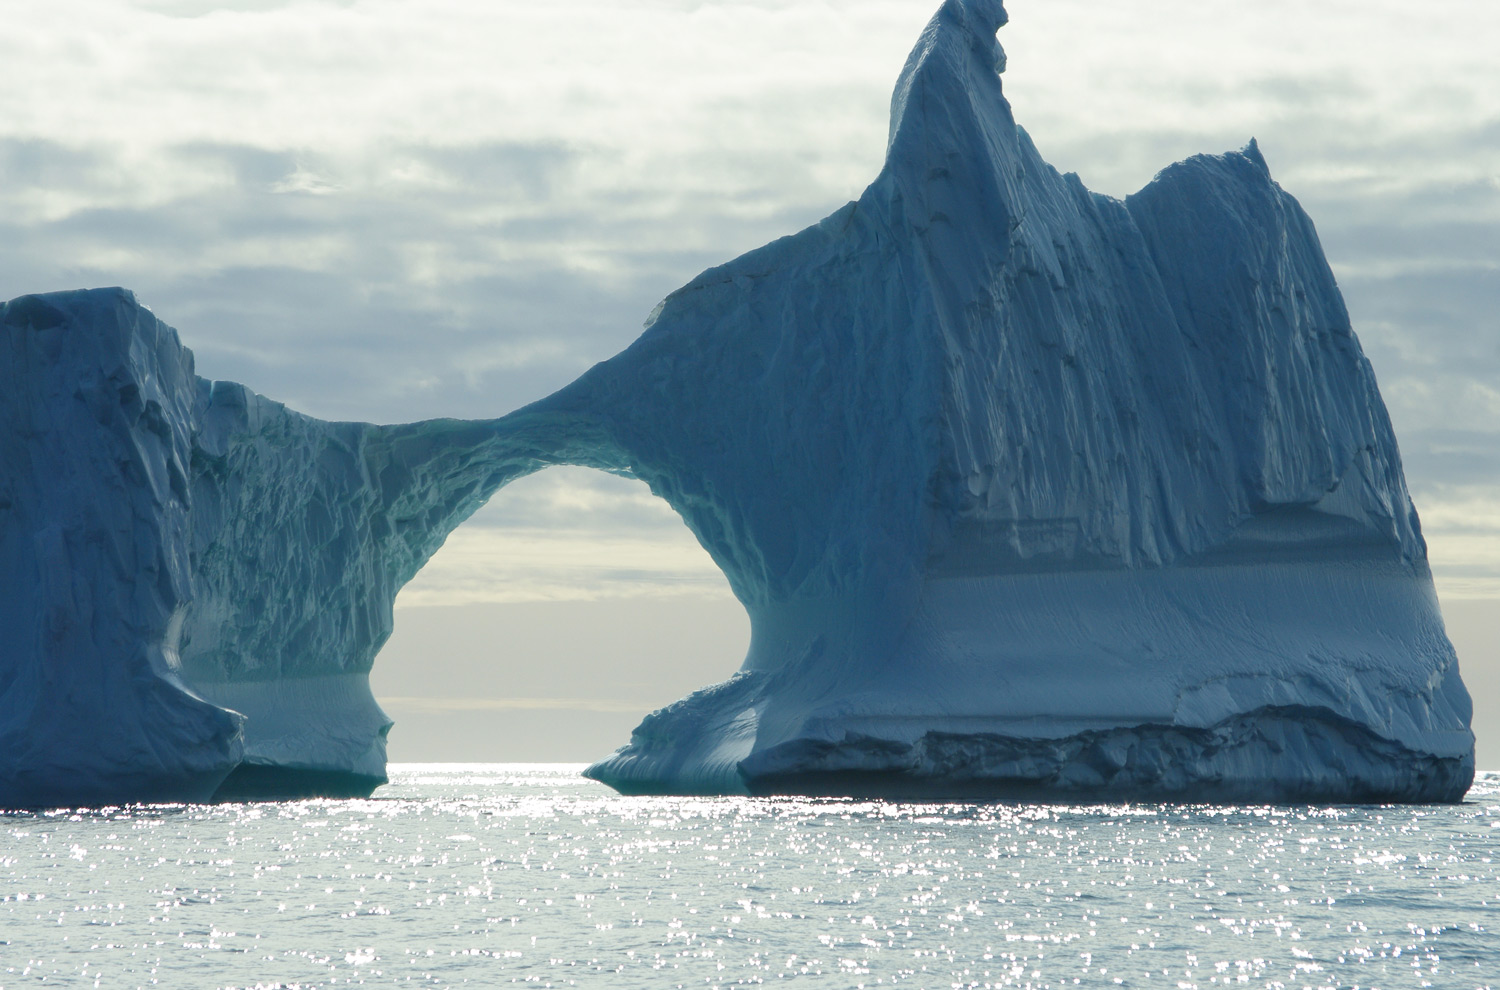 All About Ice: Glaciers and Icebergs of the Arctic and Antarctica